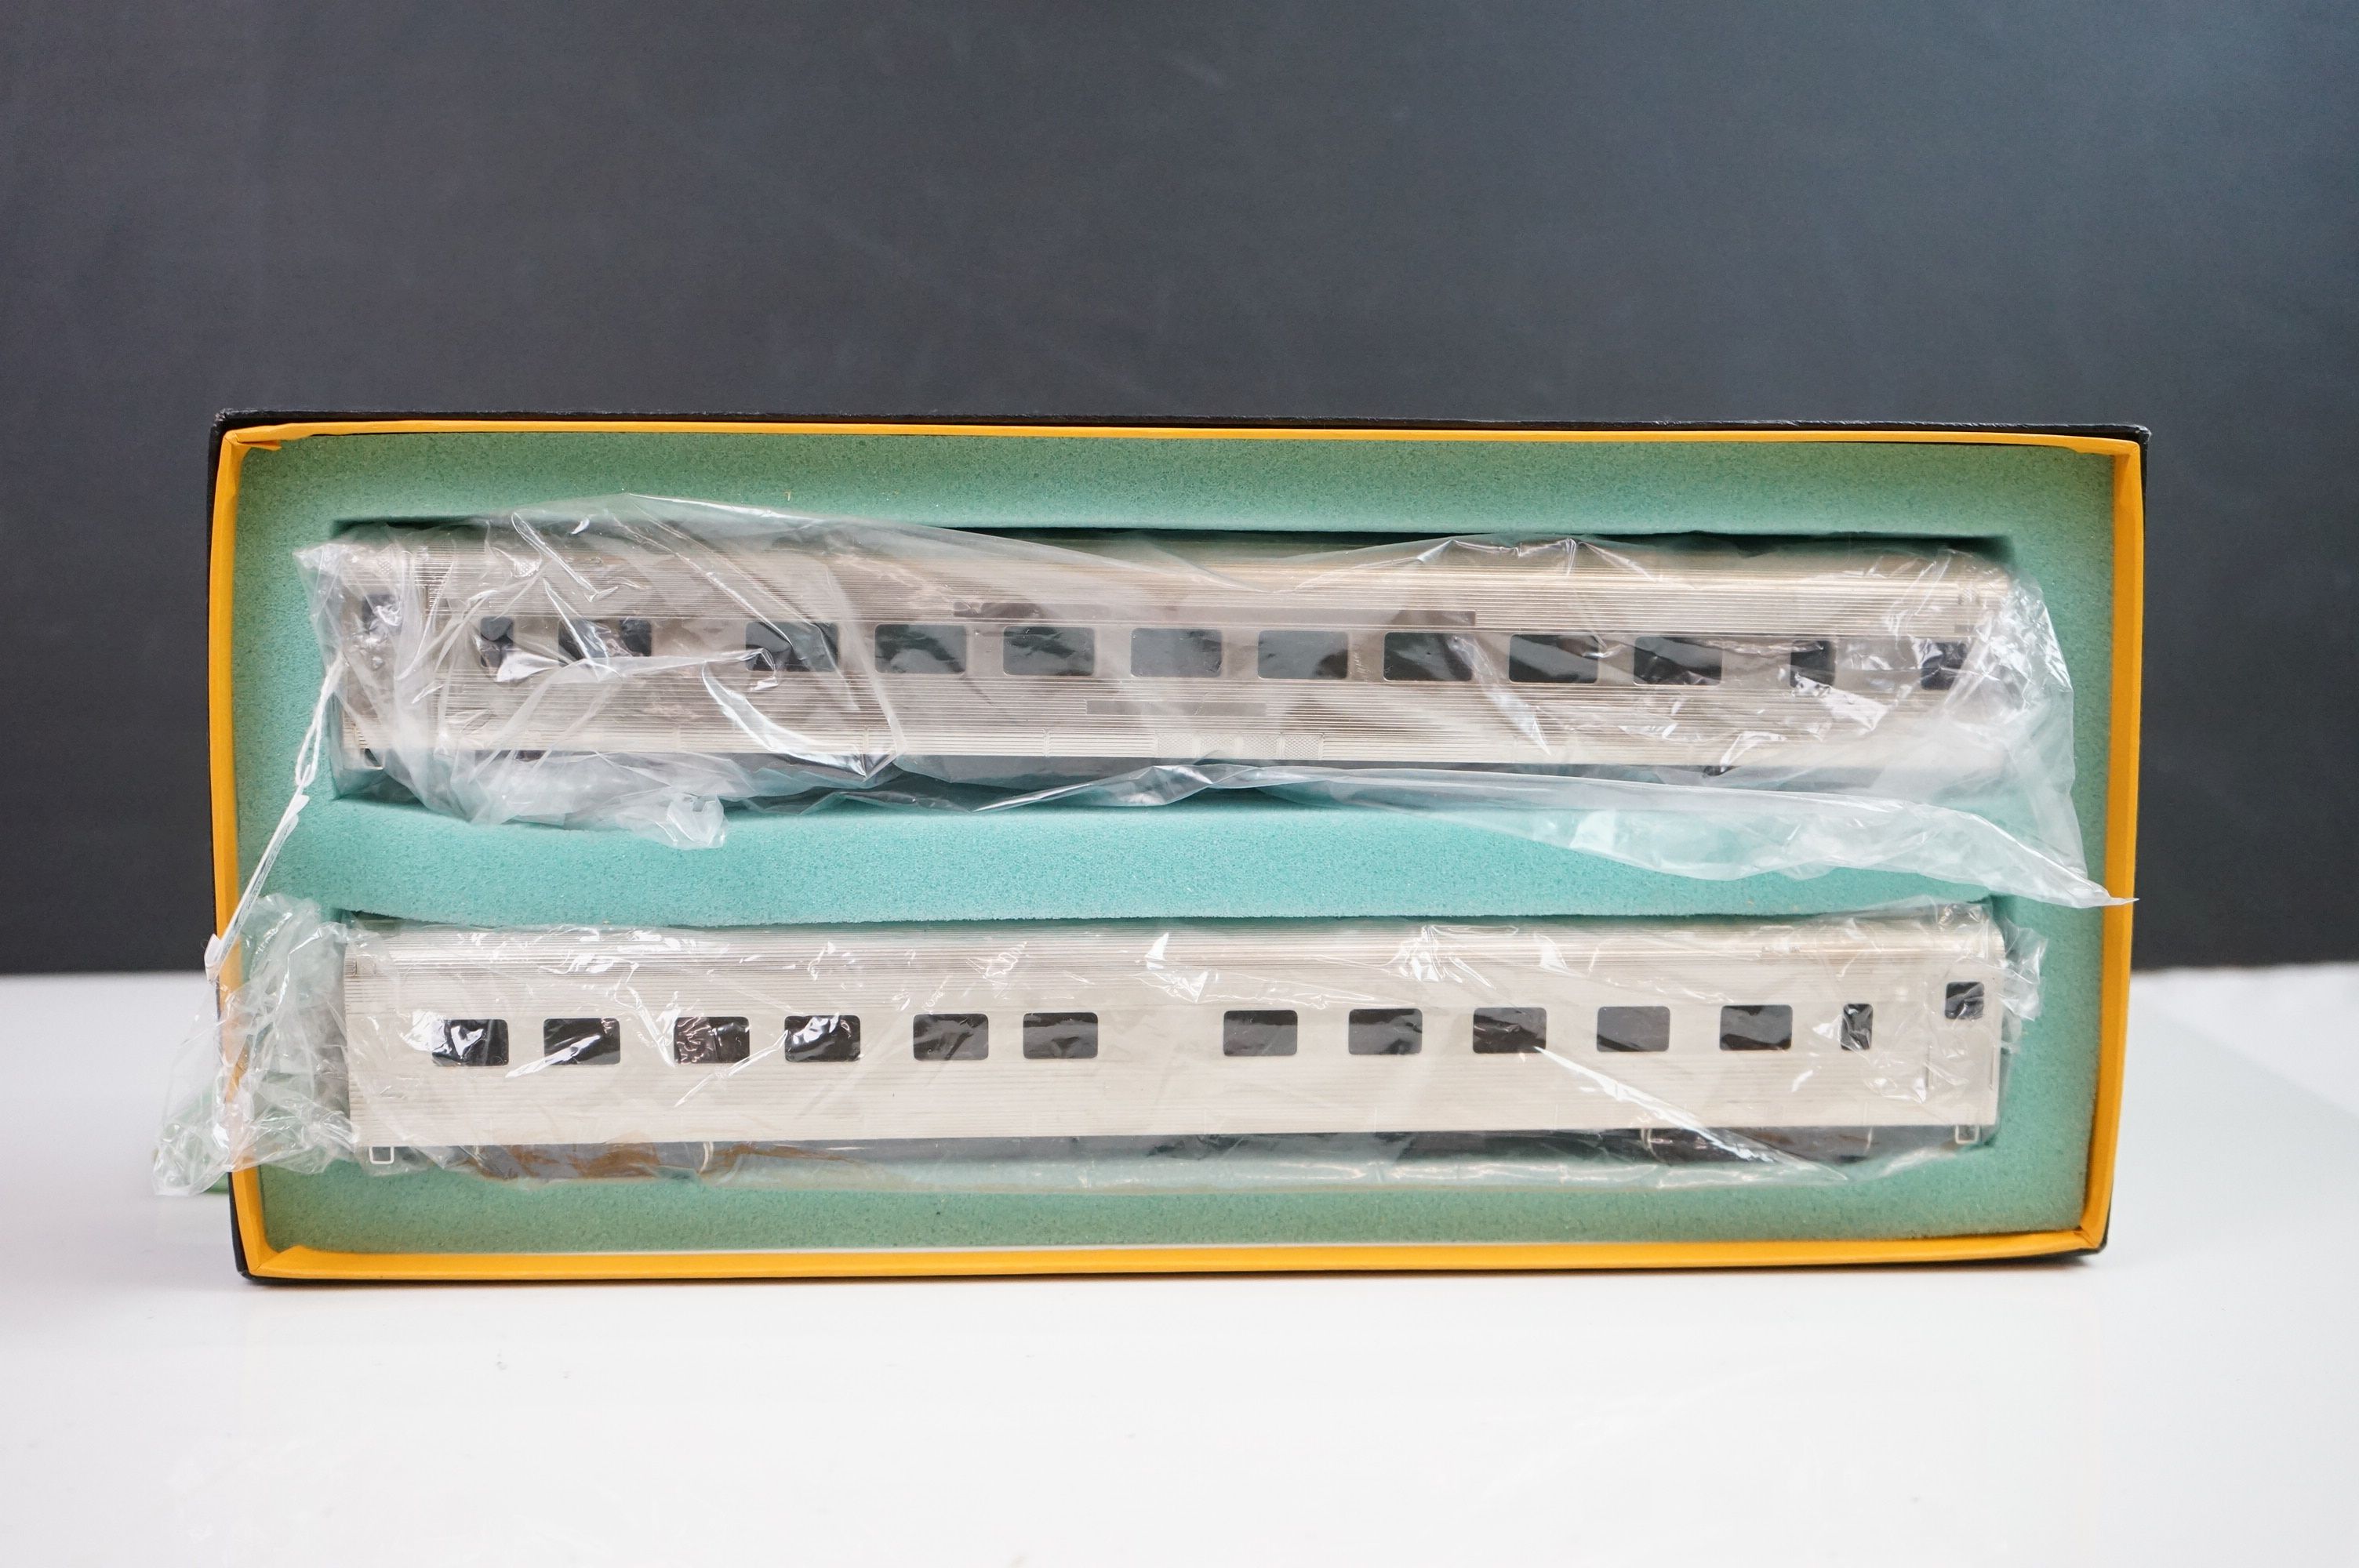 Boxed Nickel Plate HO gauge CZ Pullman Roomette brass rolling stock set made by KMT (Japan), both - Image 10 of 10